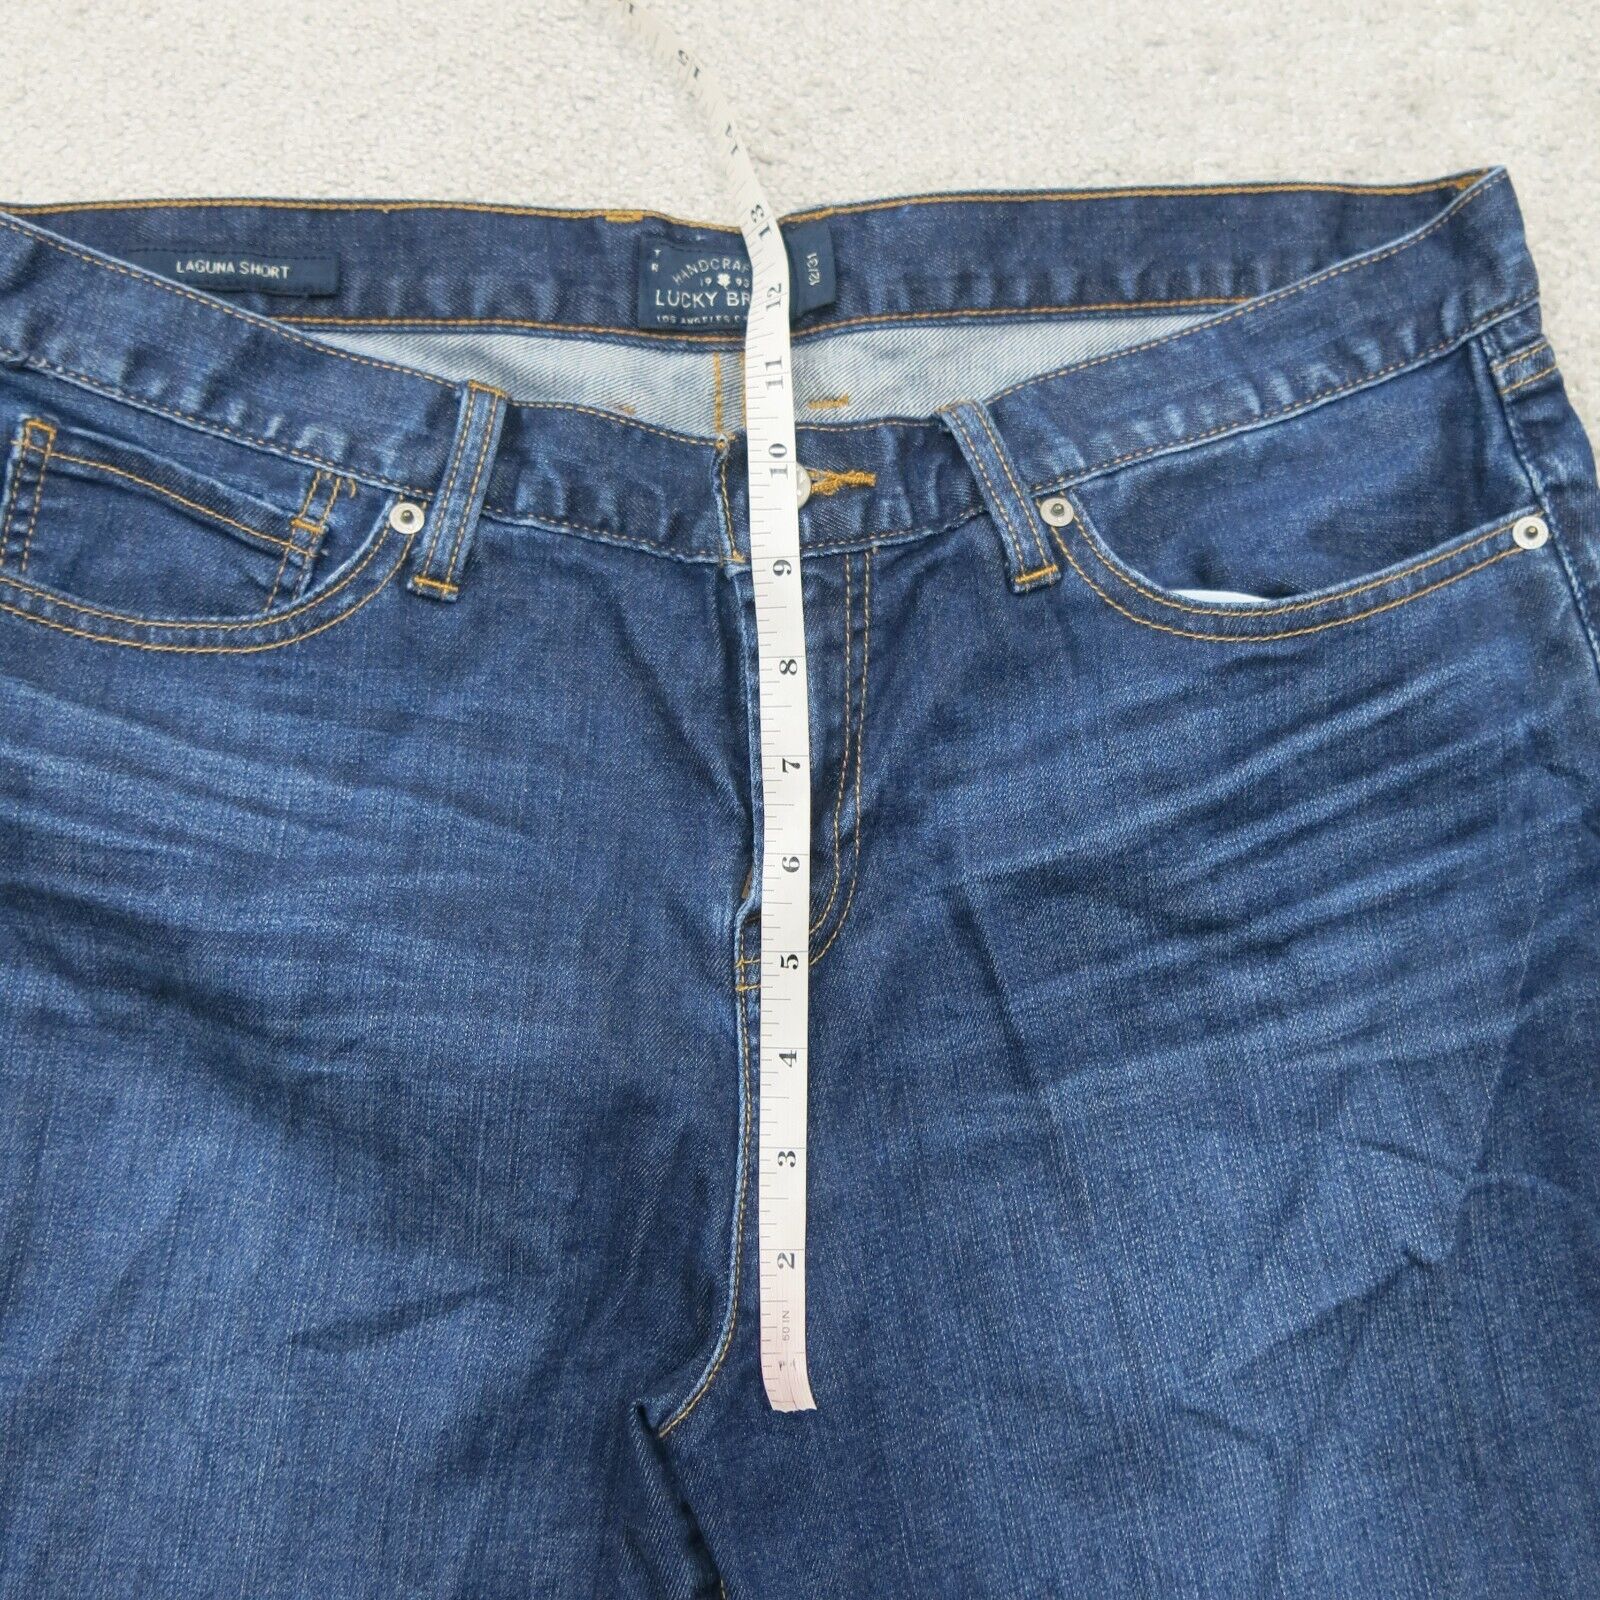 Lucky Brand Mens Laguna Shorts Jeans Mid Rise Pockets Blue Size